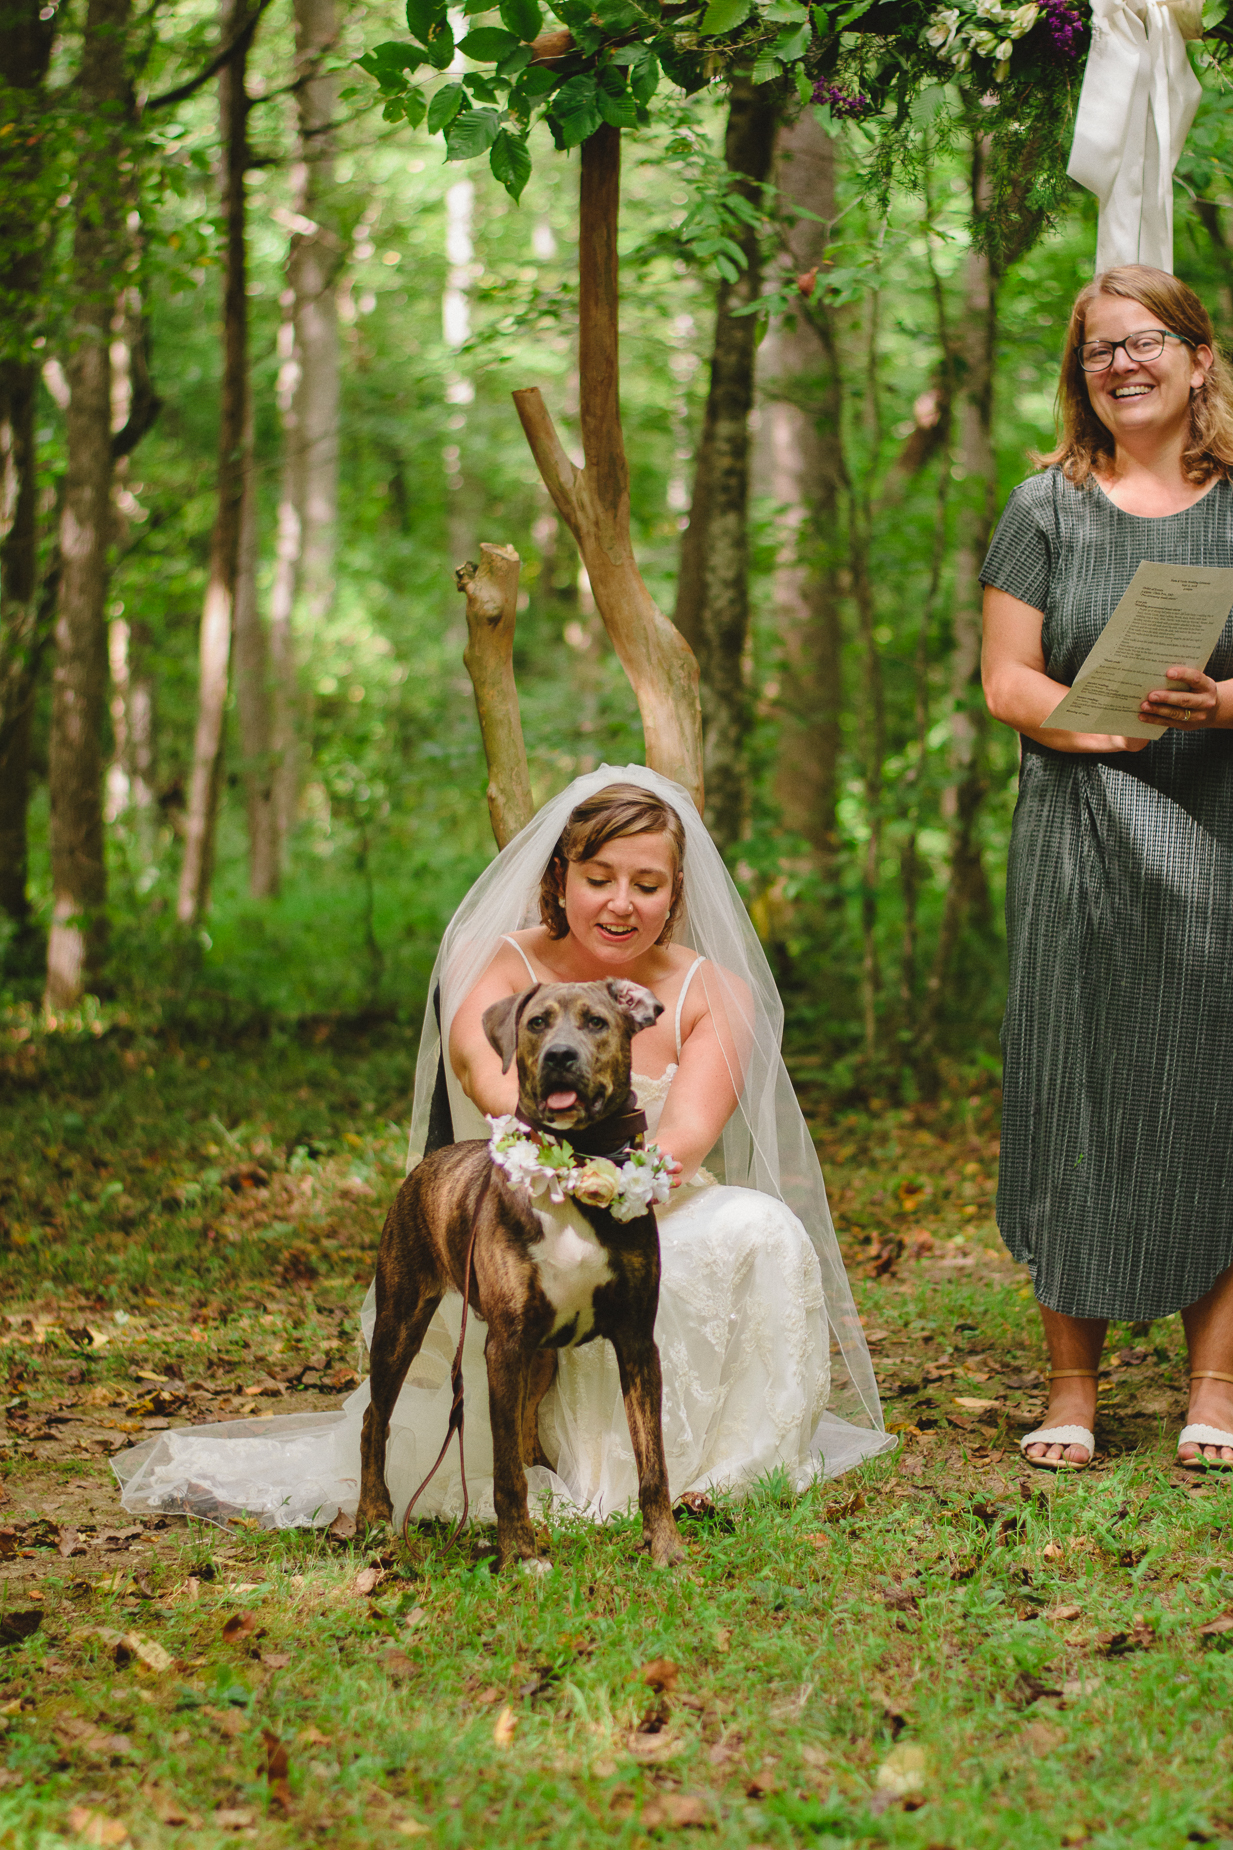 Bride holds the ring bearer dog at her wedding.